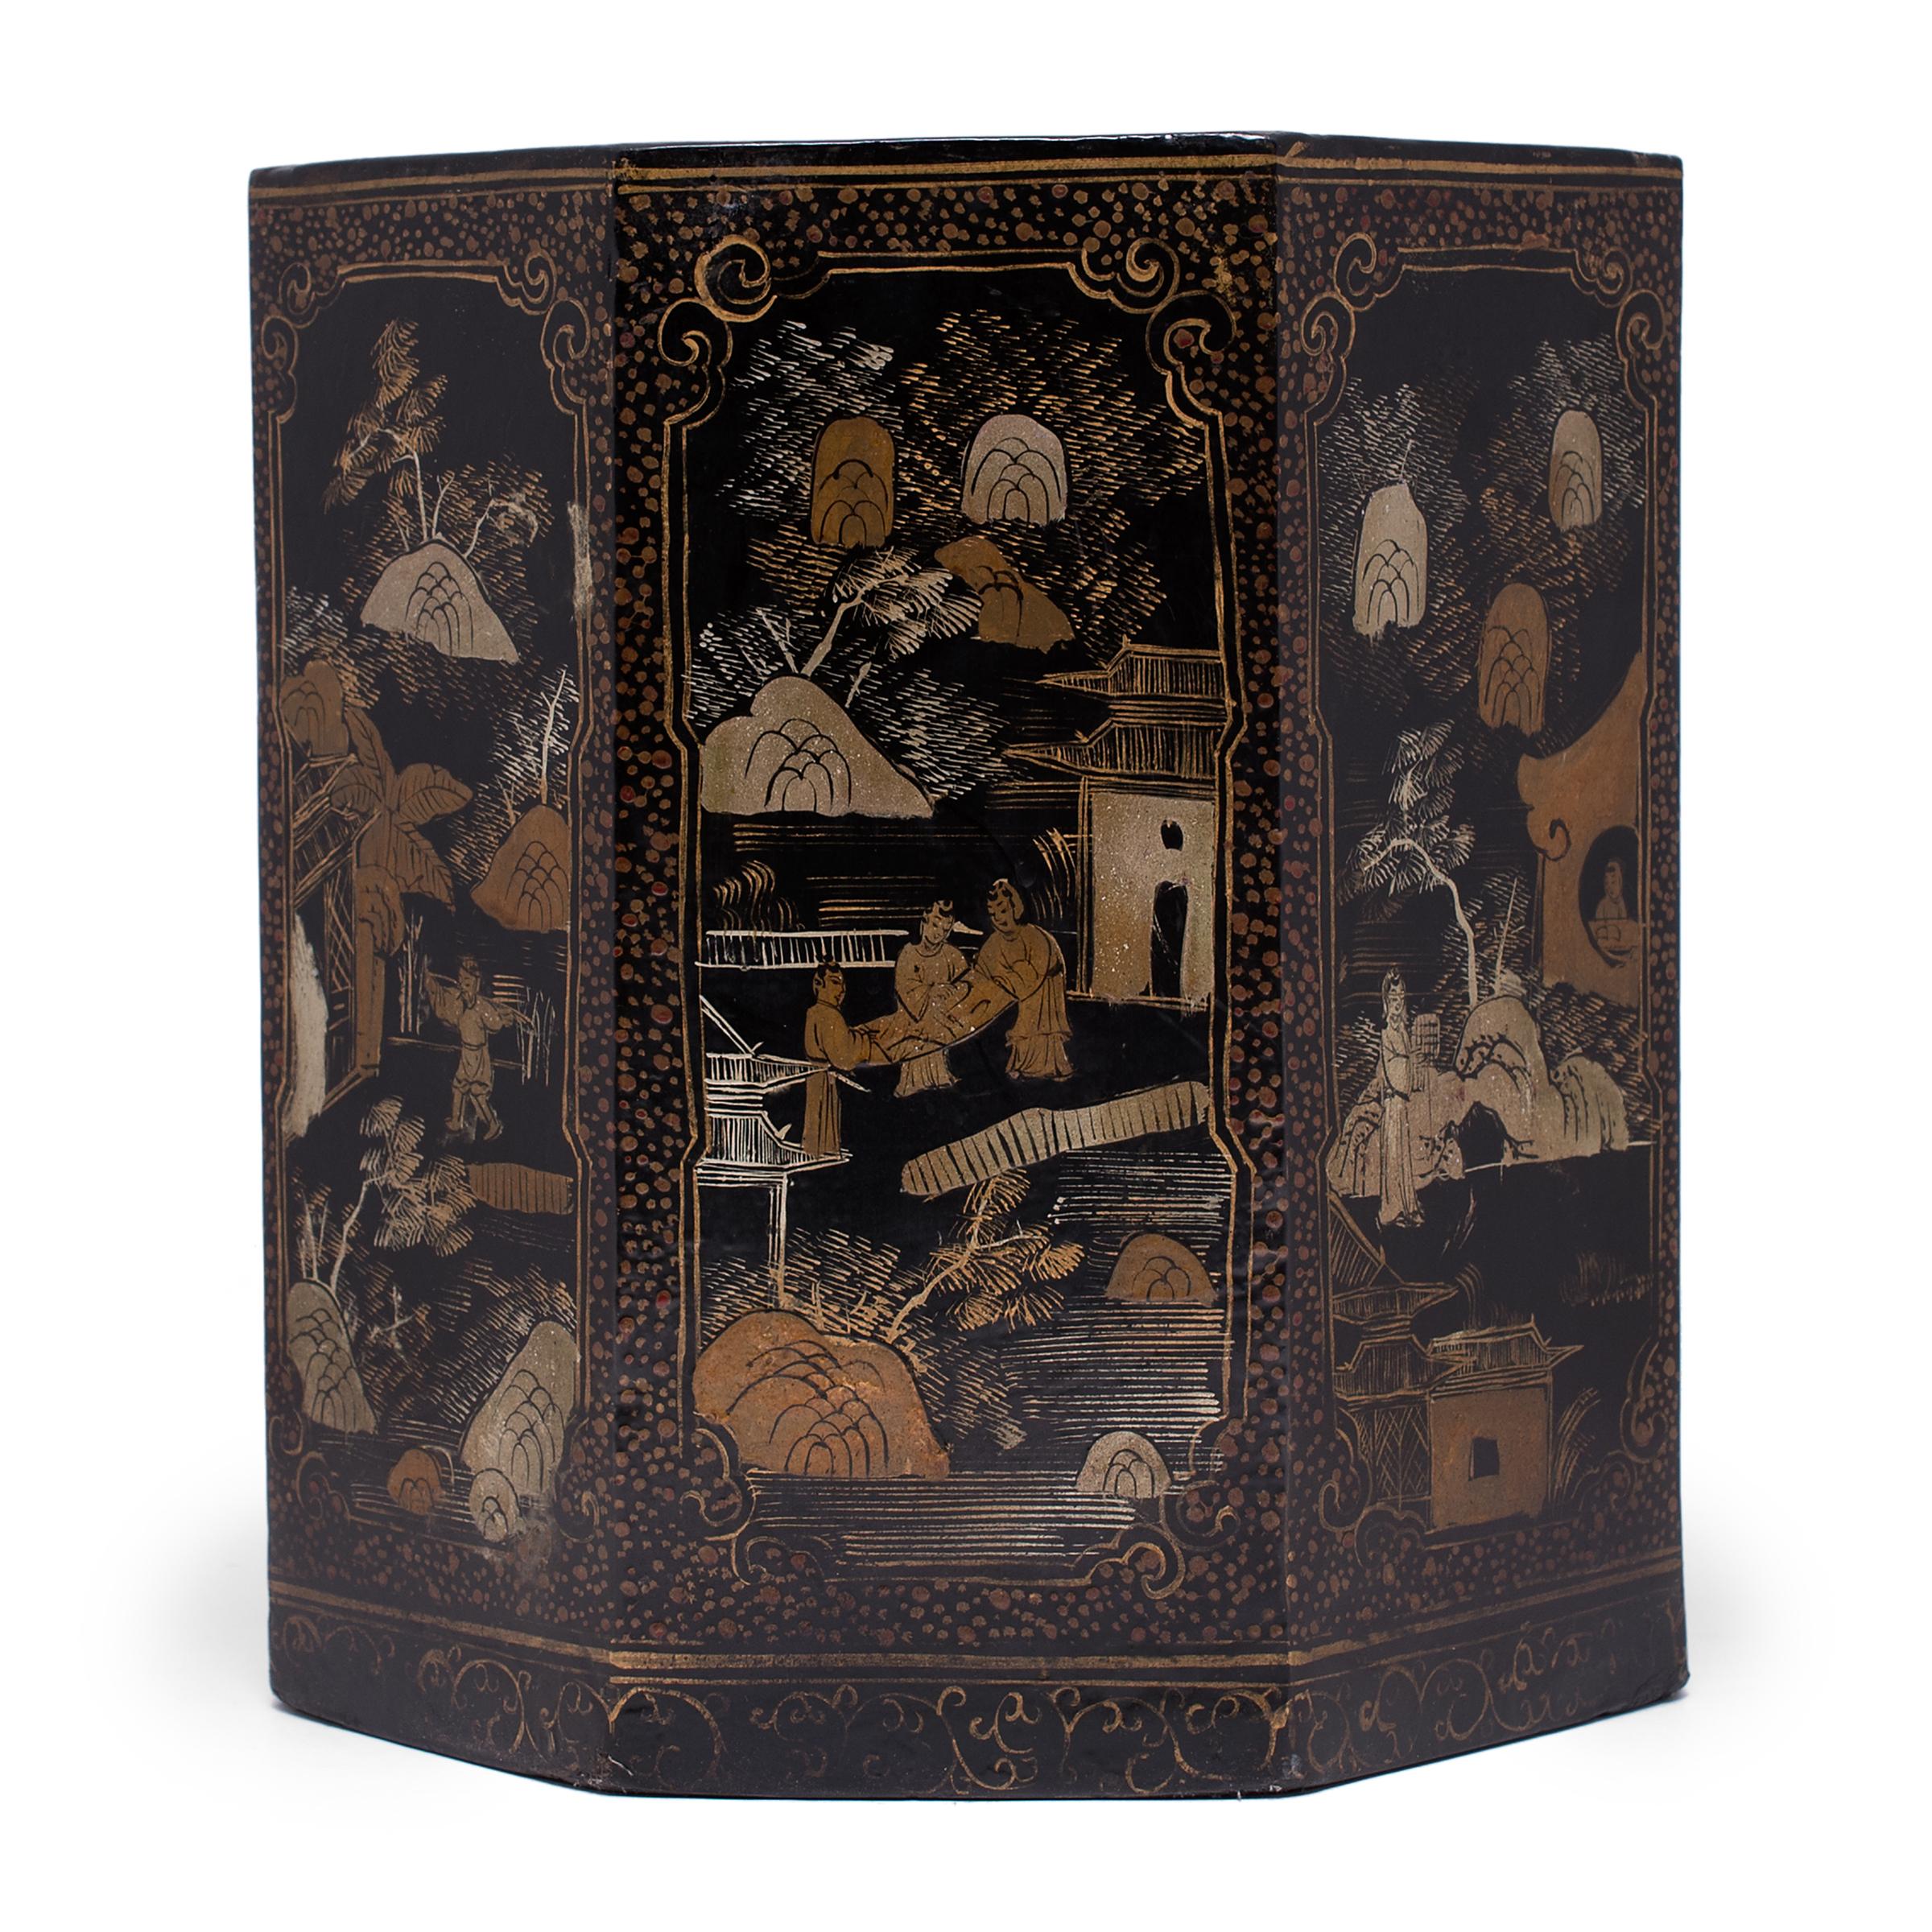 Set alongside the four treasures of the study - the calligraphy brush, ink, paper, and inkstone - the scroll pot was a fixture of every traditional scholar’s studio. Used to hold calligraphy scrolls, this lacquered container is beautifully decorated